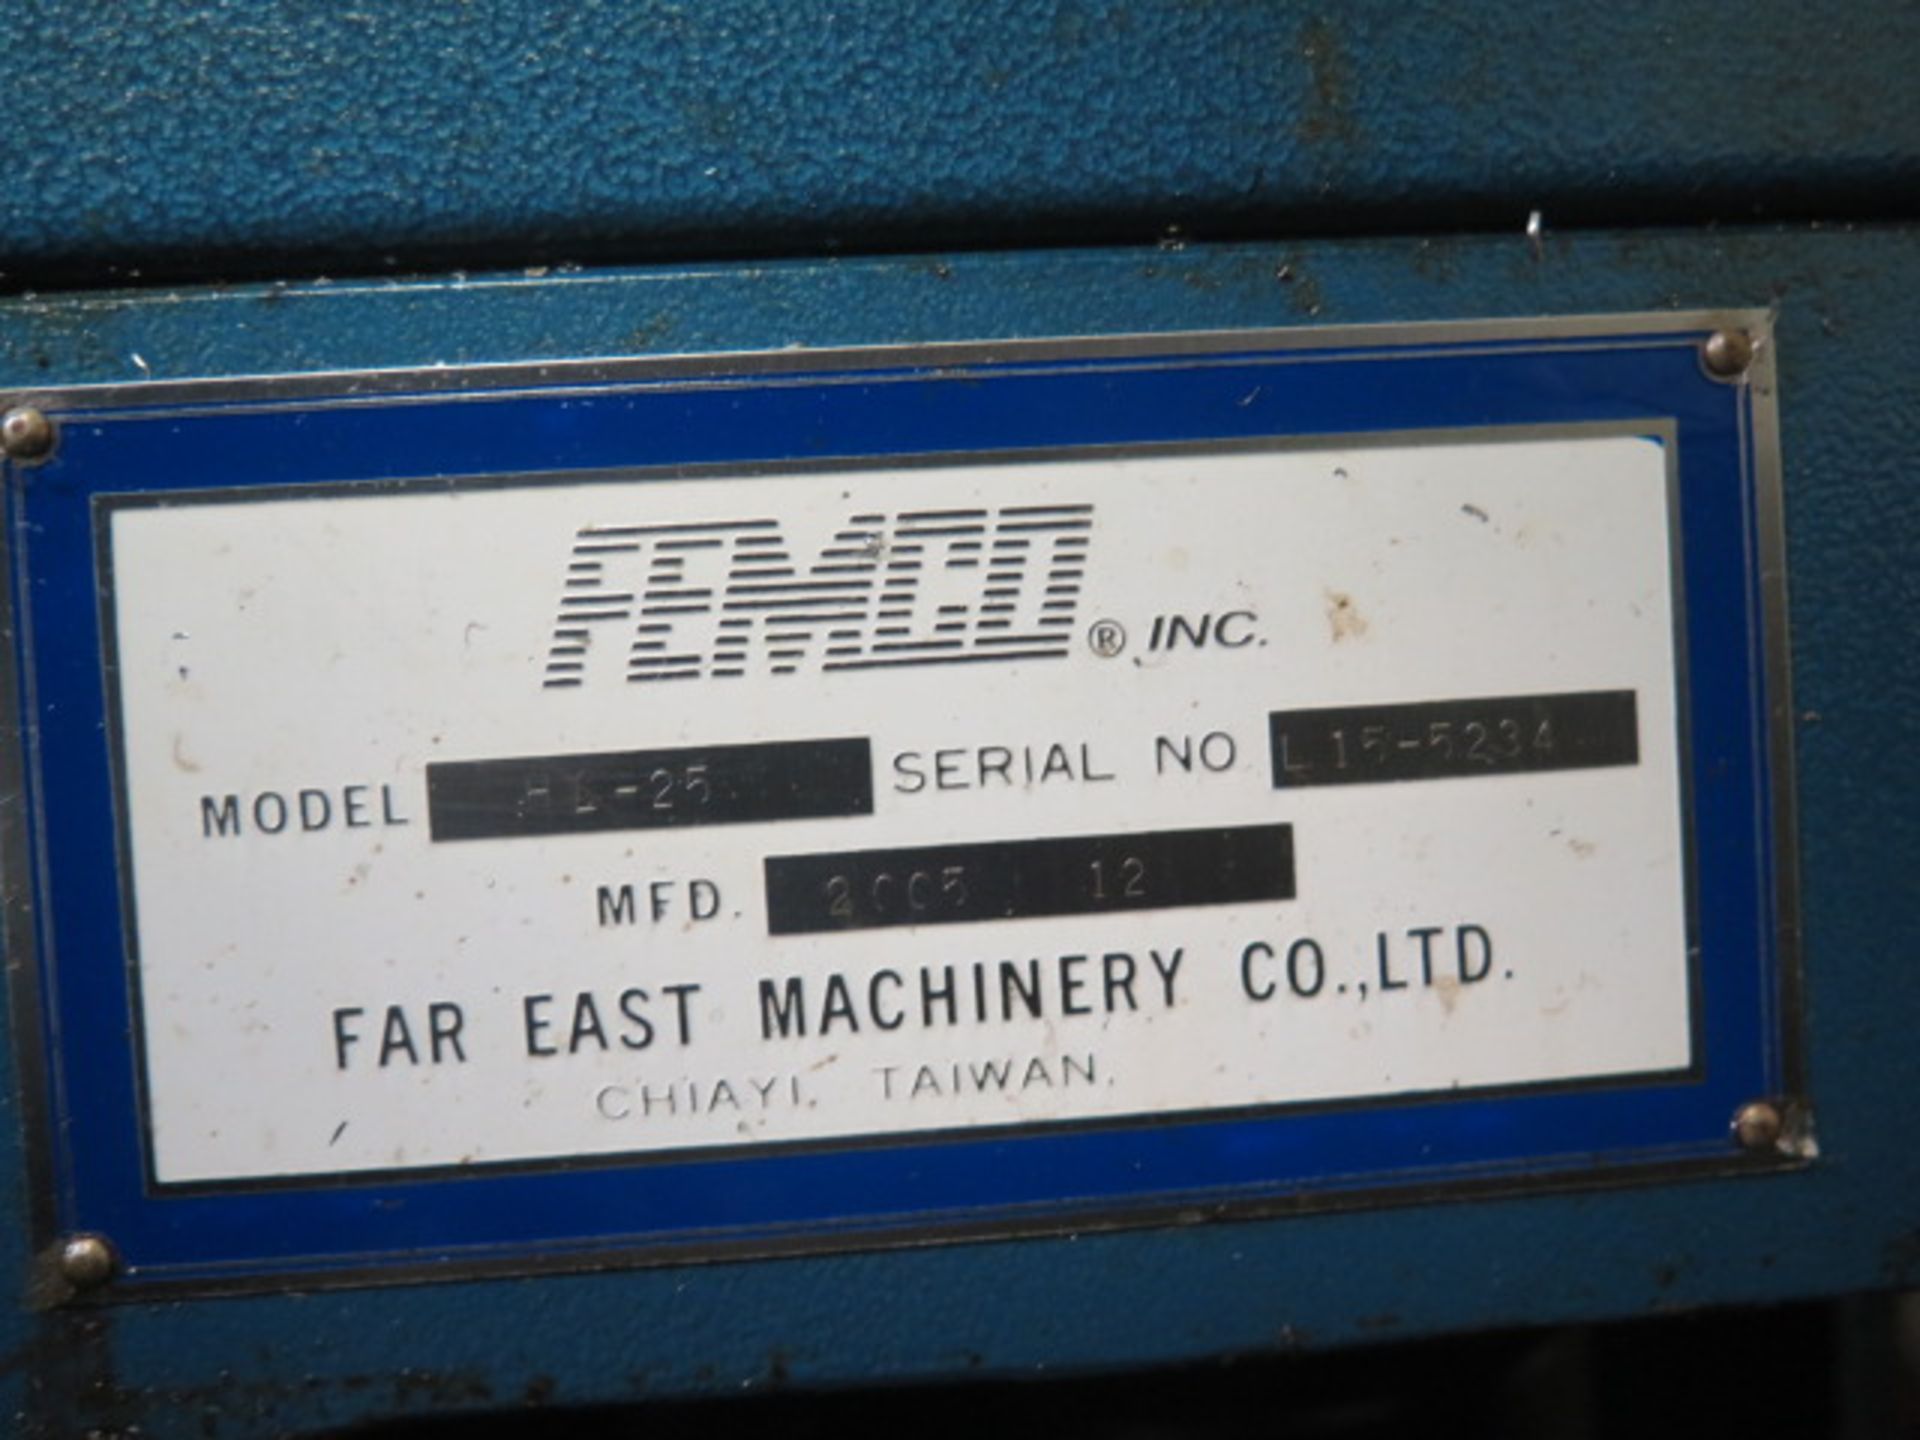 2005 Femco HL-25 CNC Turning Center s/n L15-5234 w/ Fanuc 0i-TC Controls, Tool Presetter, SOLD AS IS - Image 13 of 13